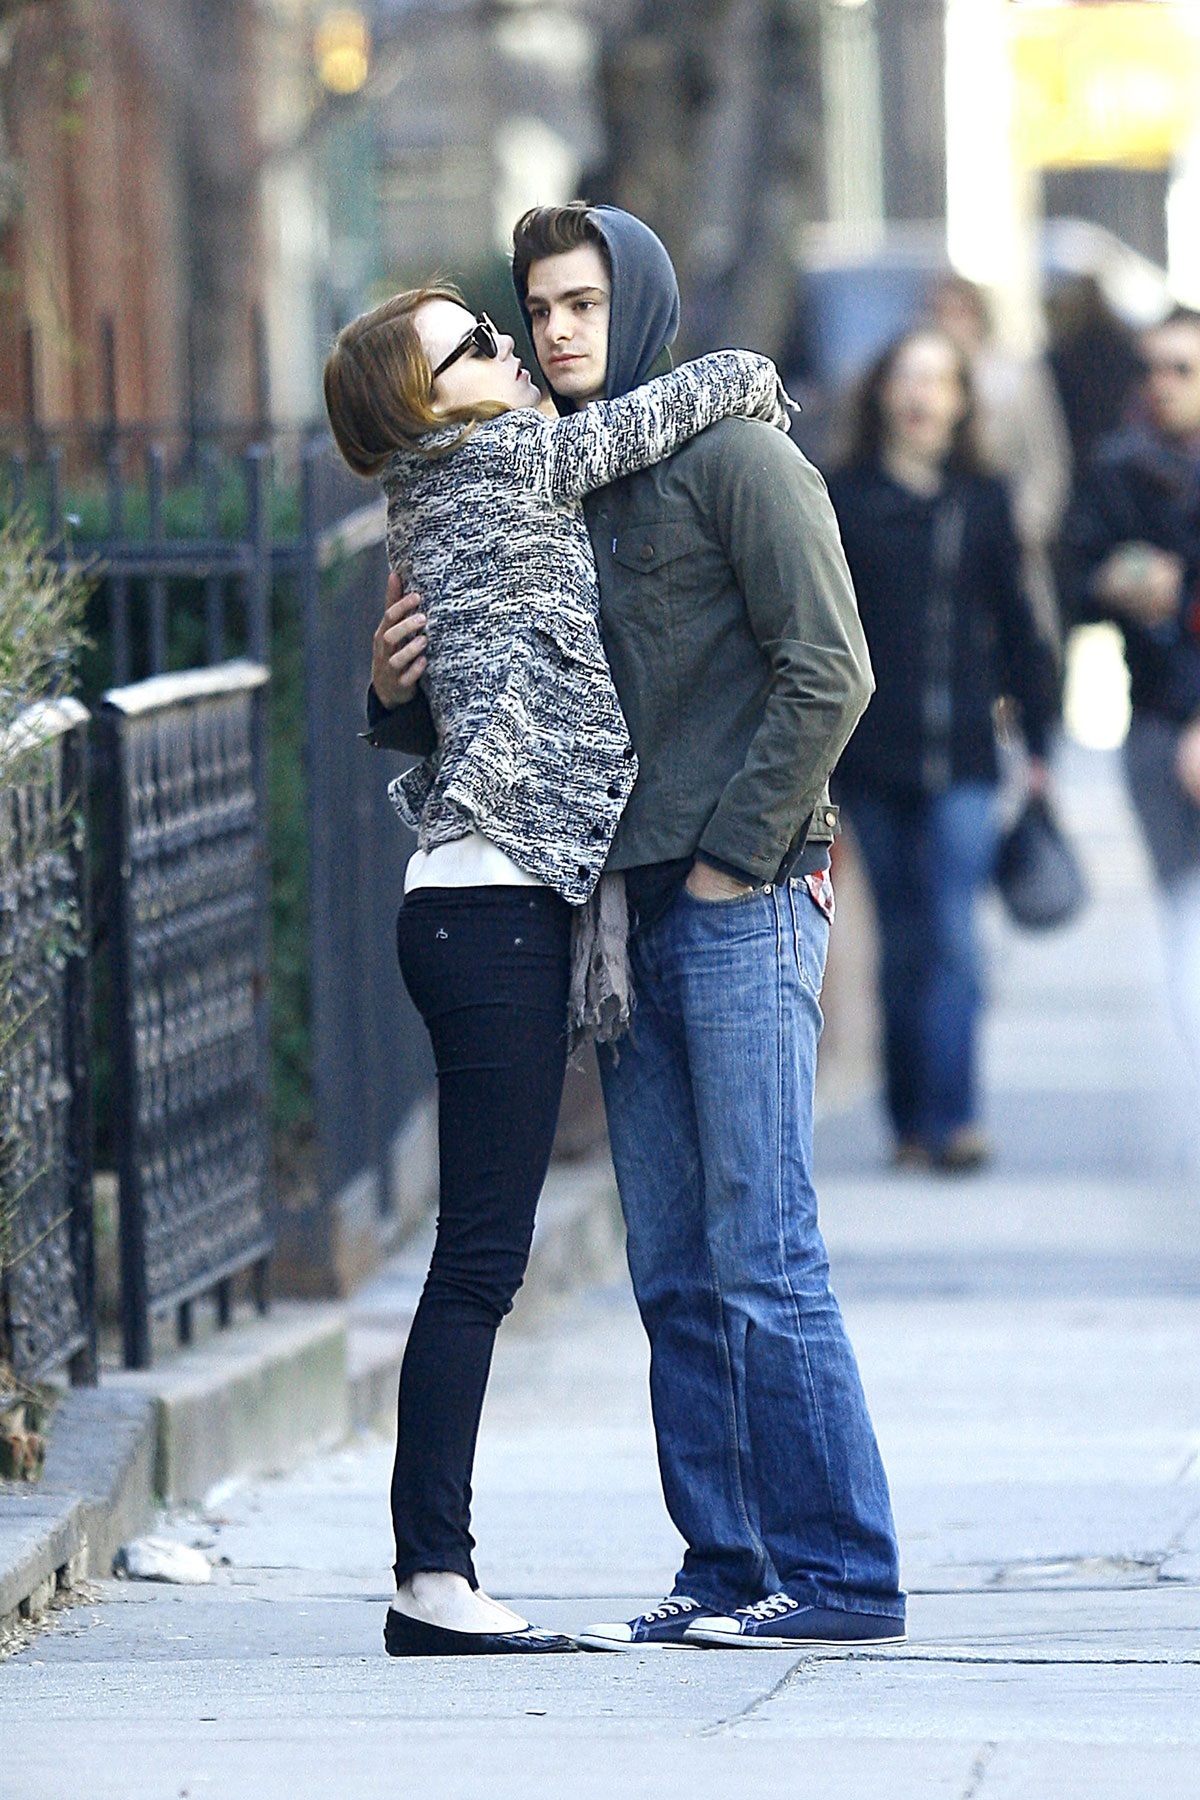 emma-stone-and-andrew-garfield-sharing-kiss-in-new-york-and-emma-stone-1543220725.jpg